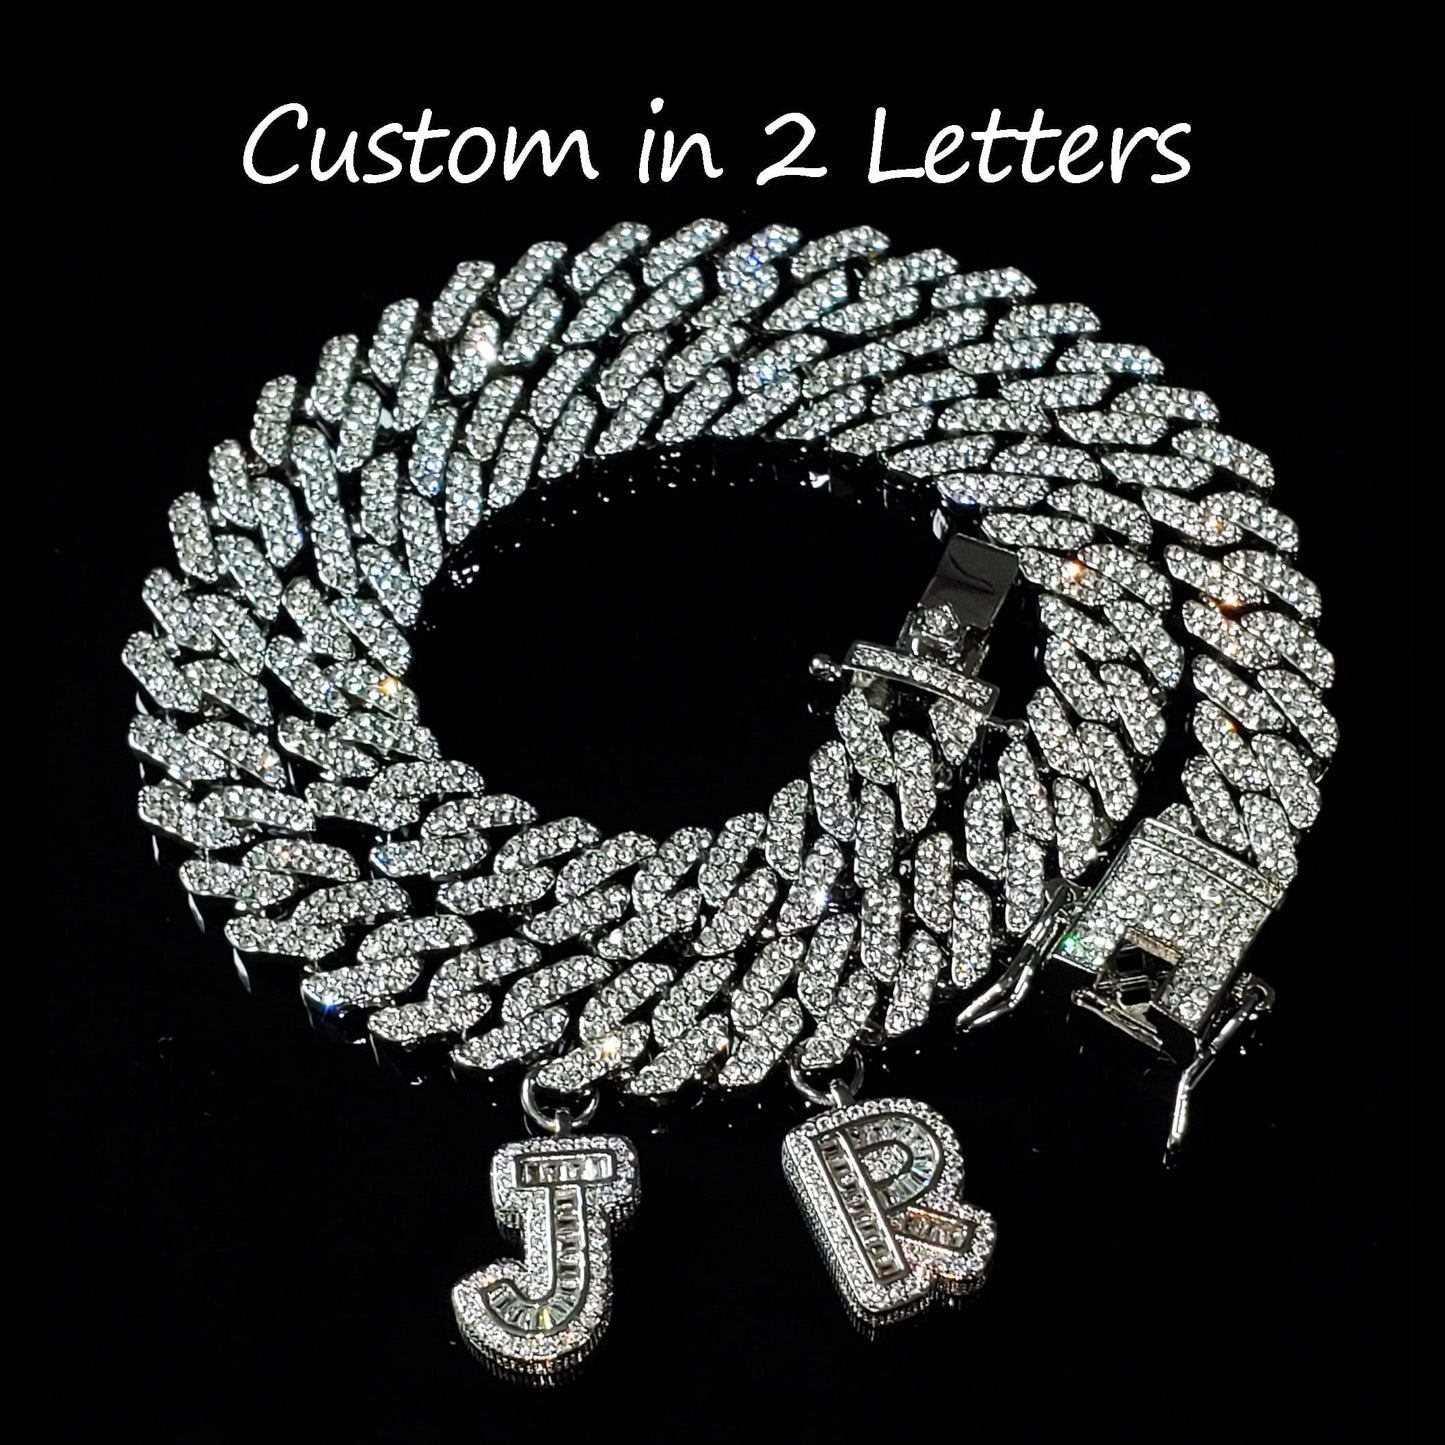 ‘Ice Ice’ Personalized Block Letter Name Choker Necklaces by Bling Addict | BlingxAddict